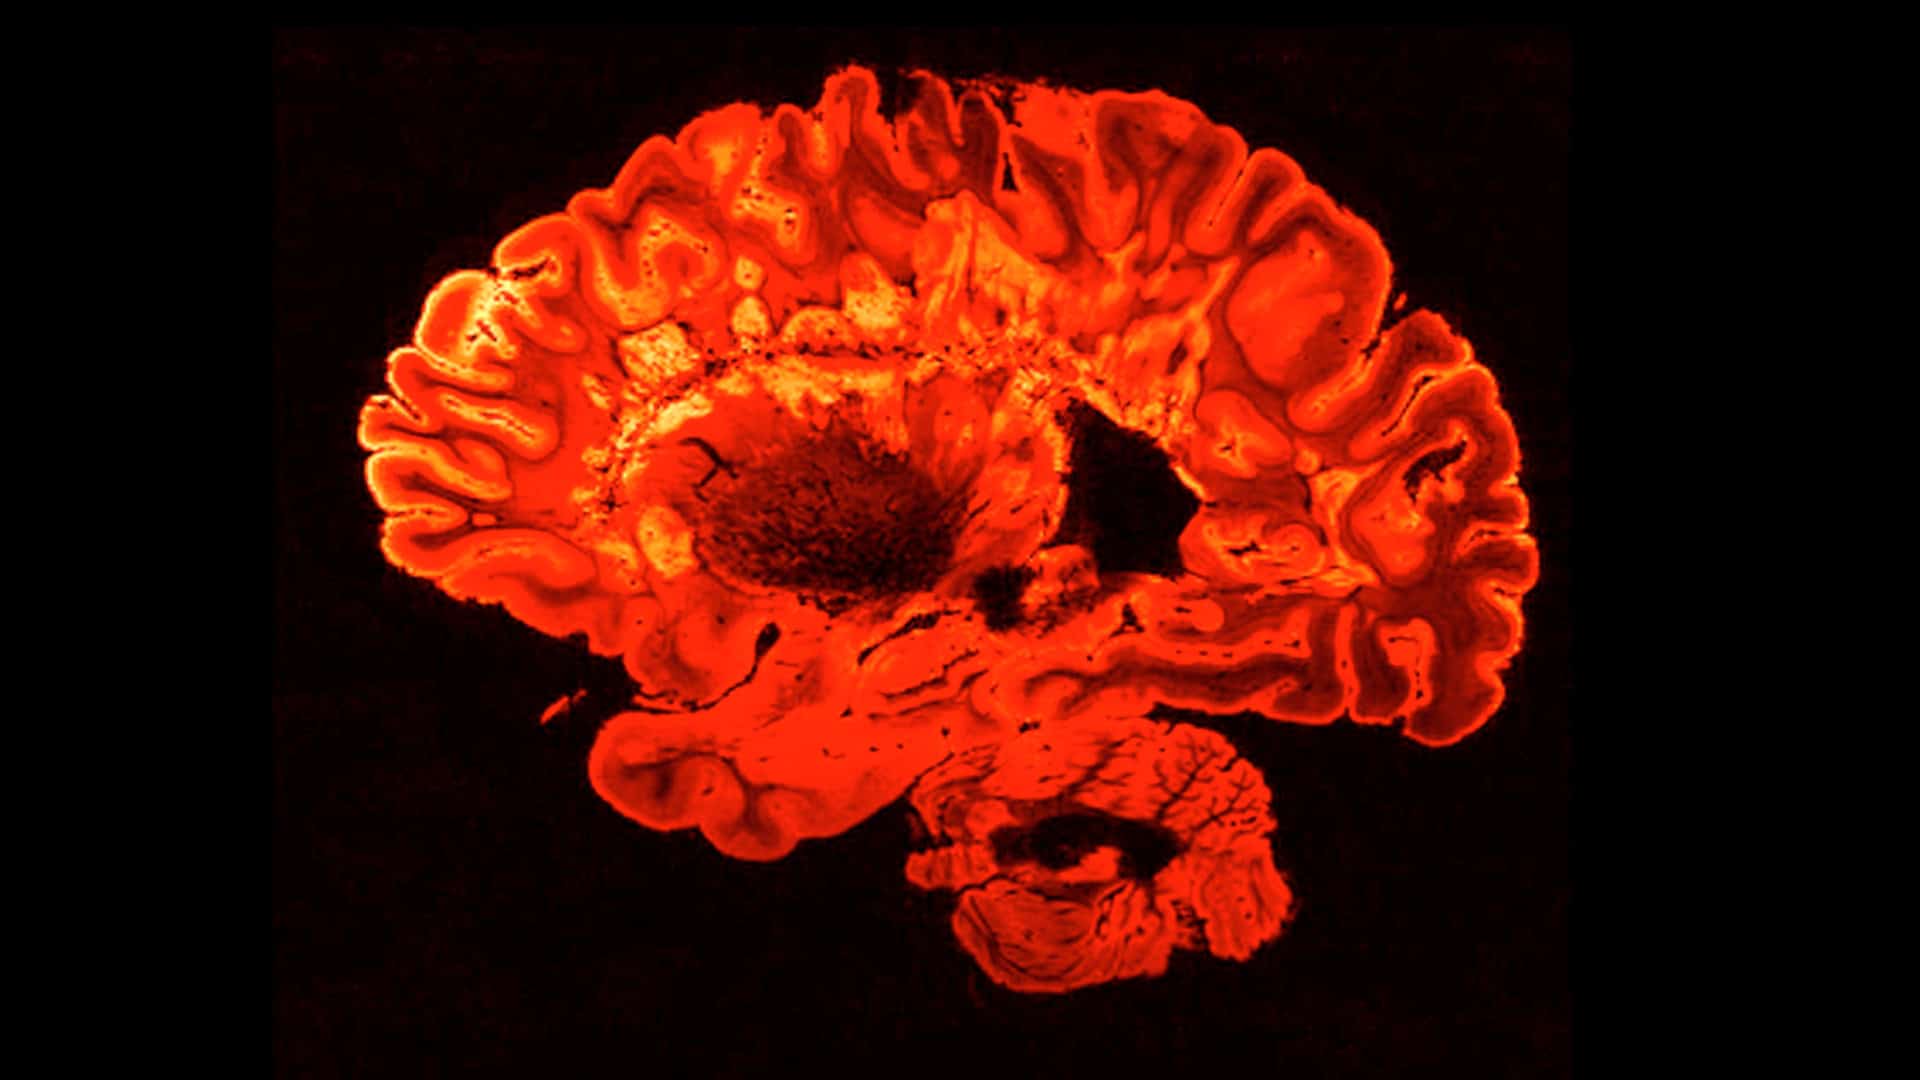 A image of the brain created through functional magnetic resonance imaging (fMRI).